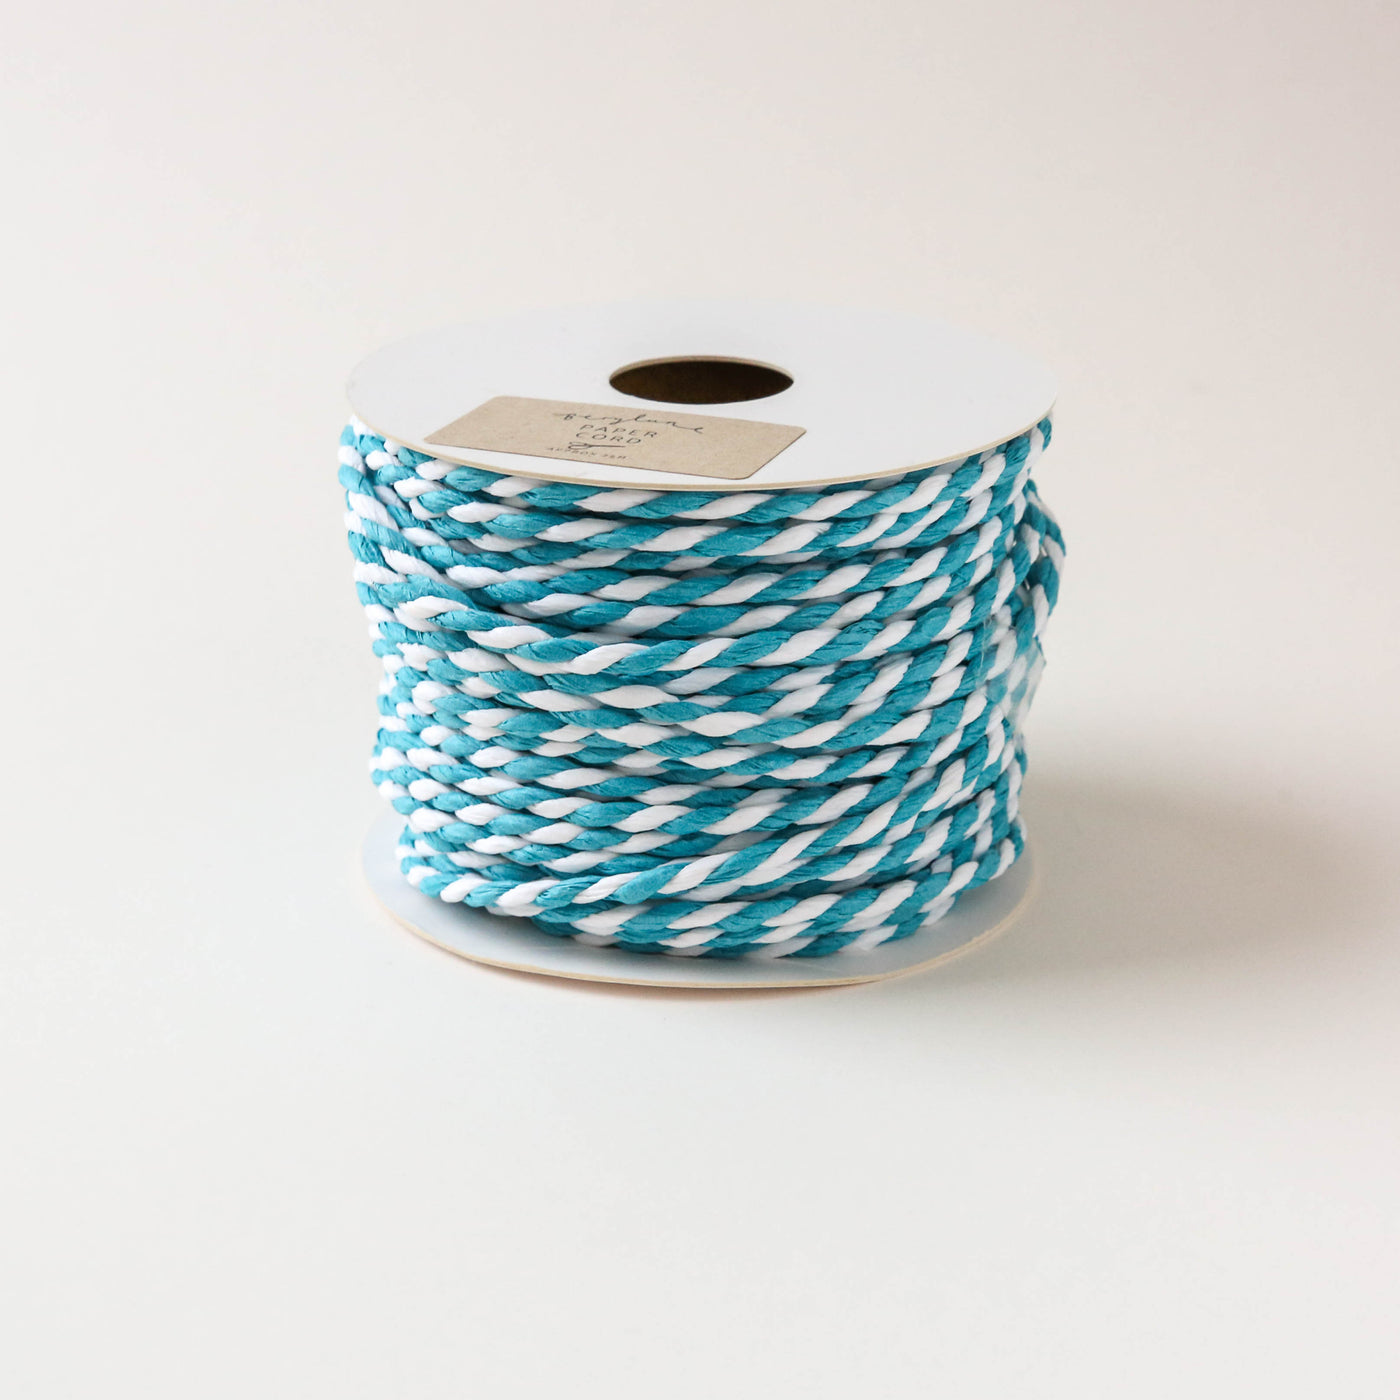 Twisted Paper Cord